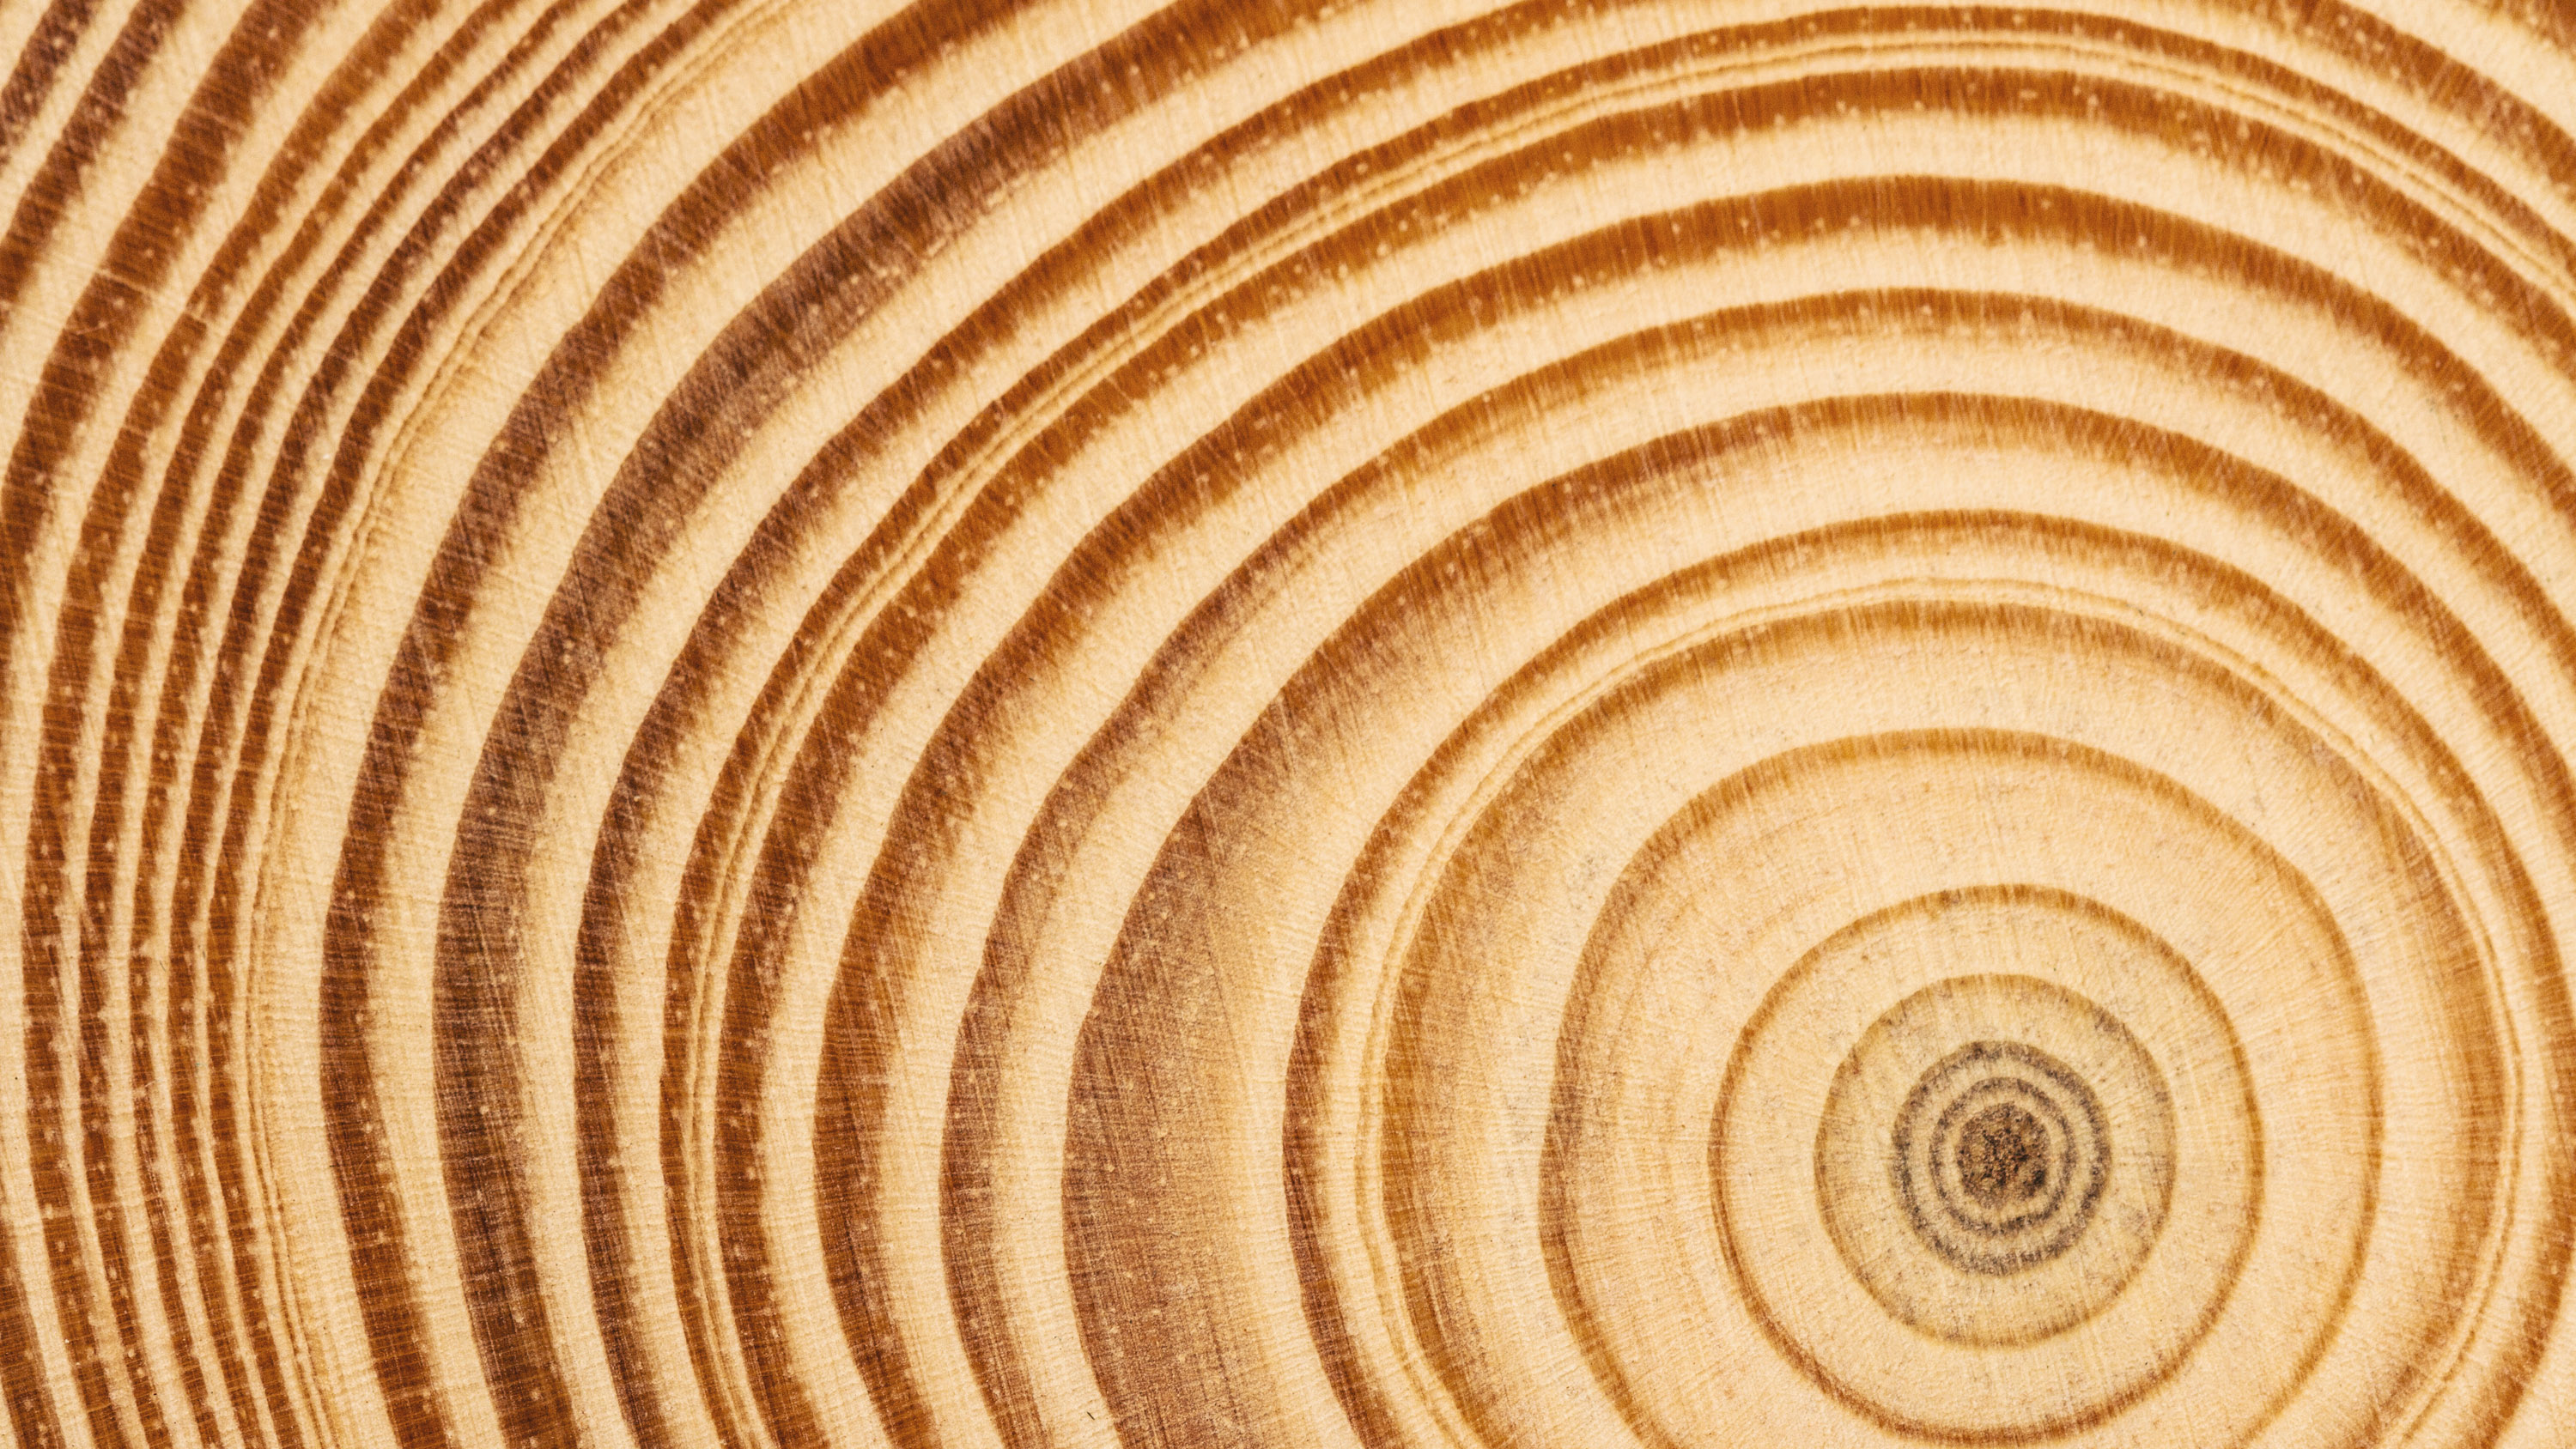 top view closeup of brown slice of freshly cut wood showing dense concentric growth rings